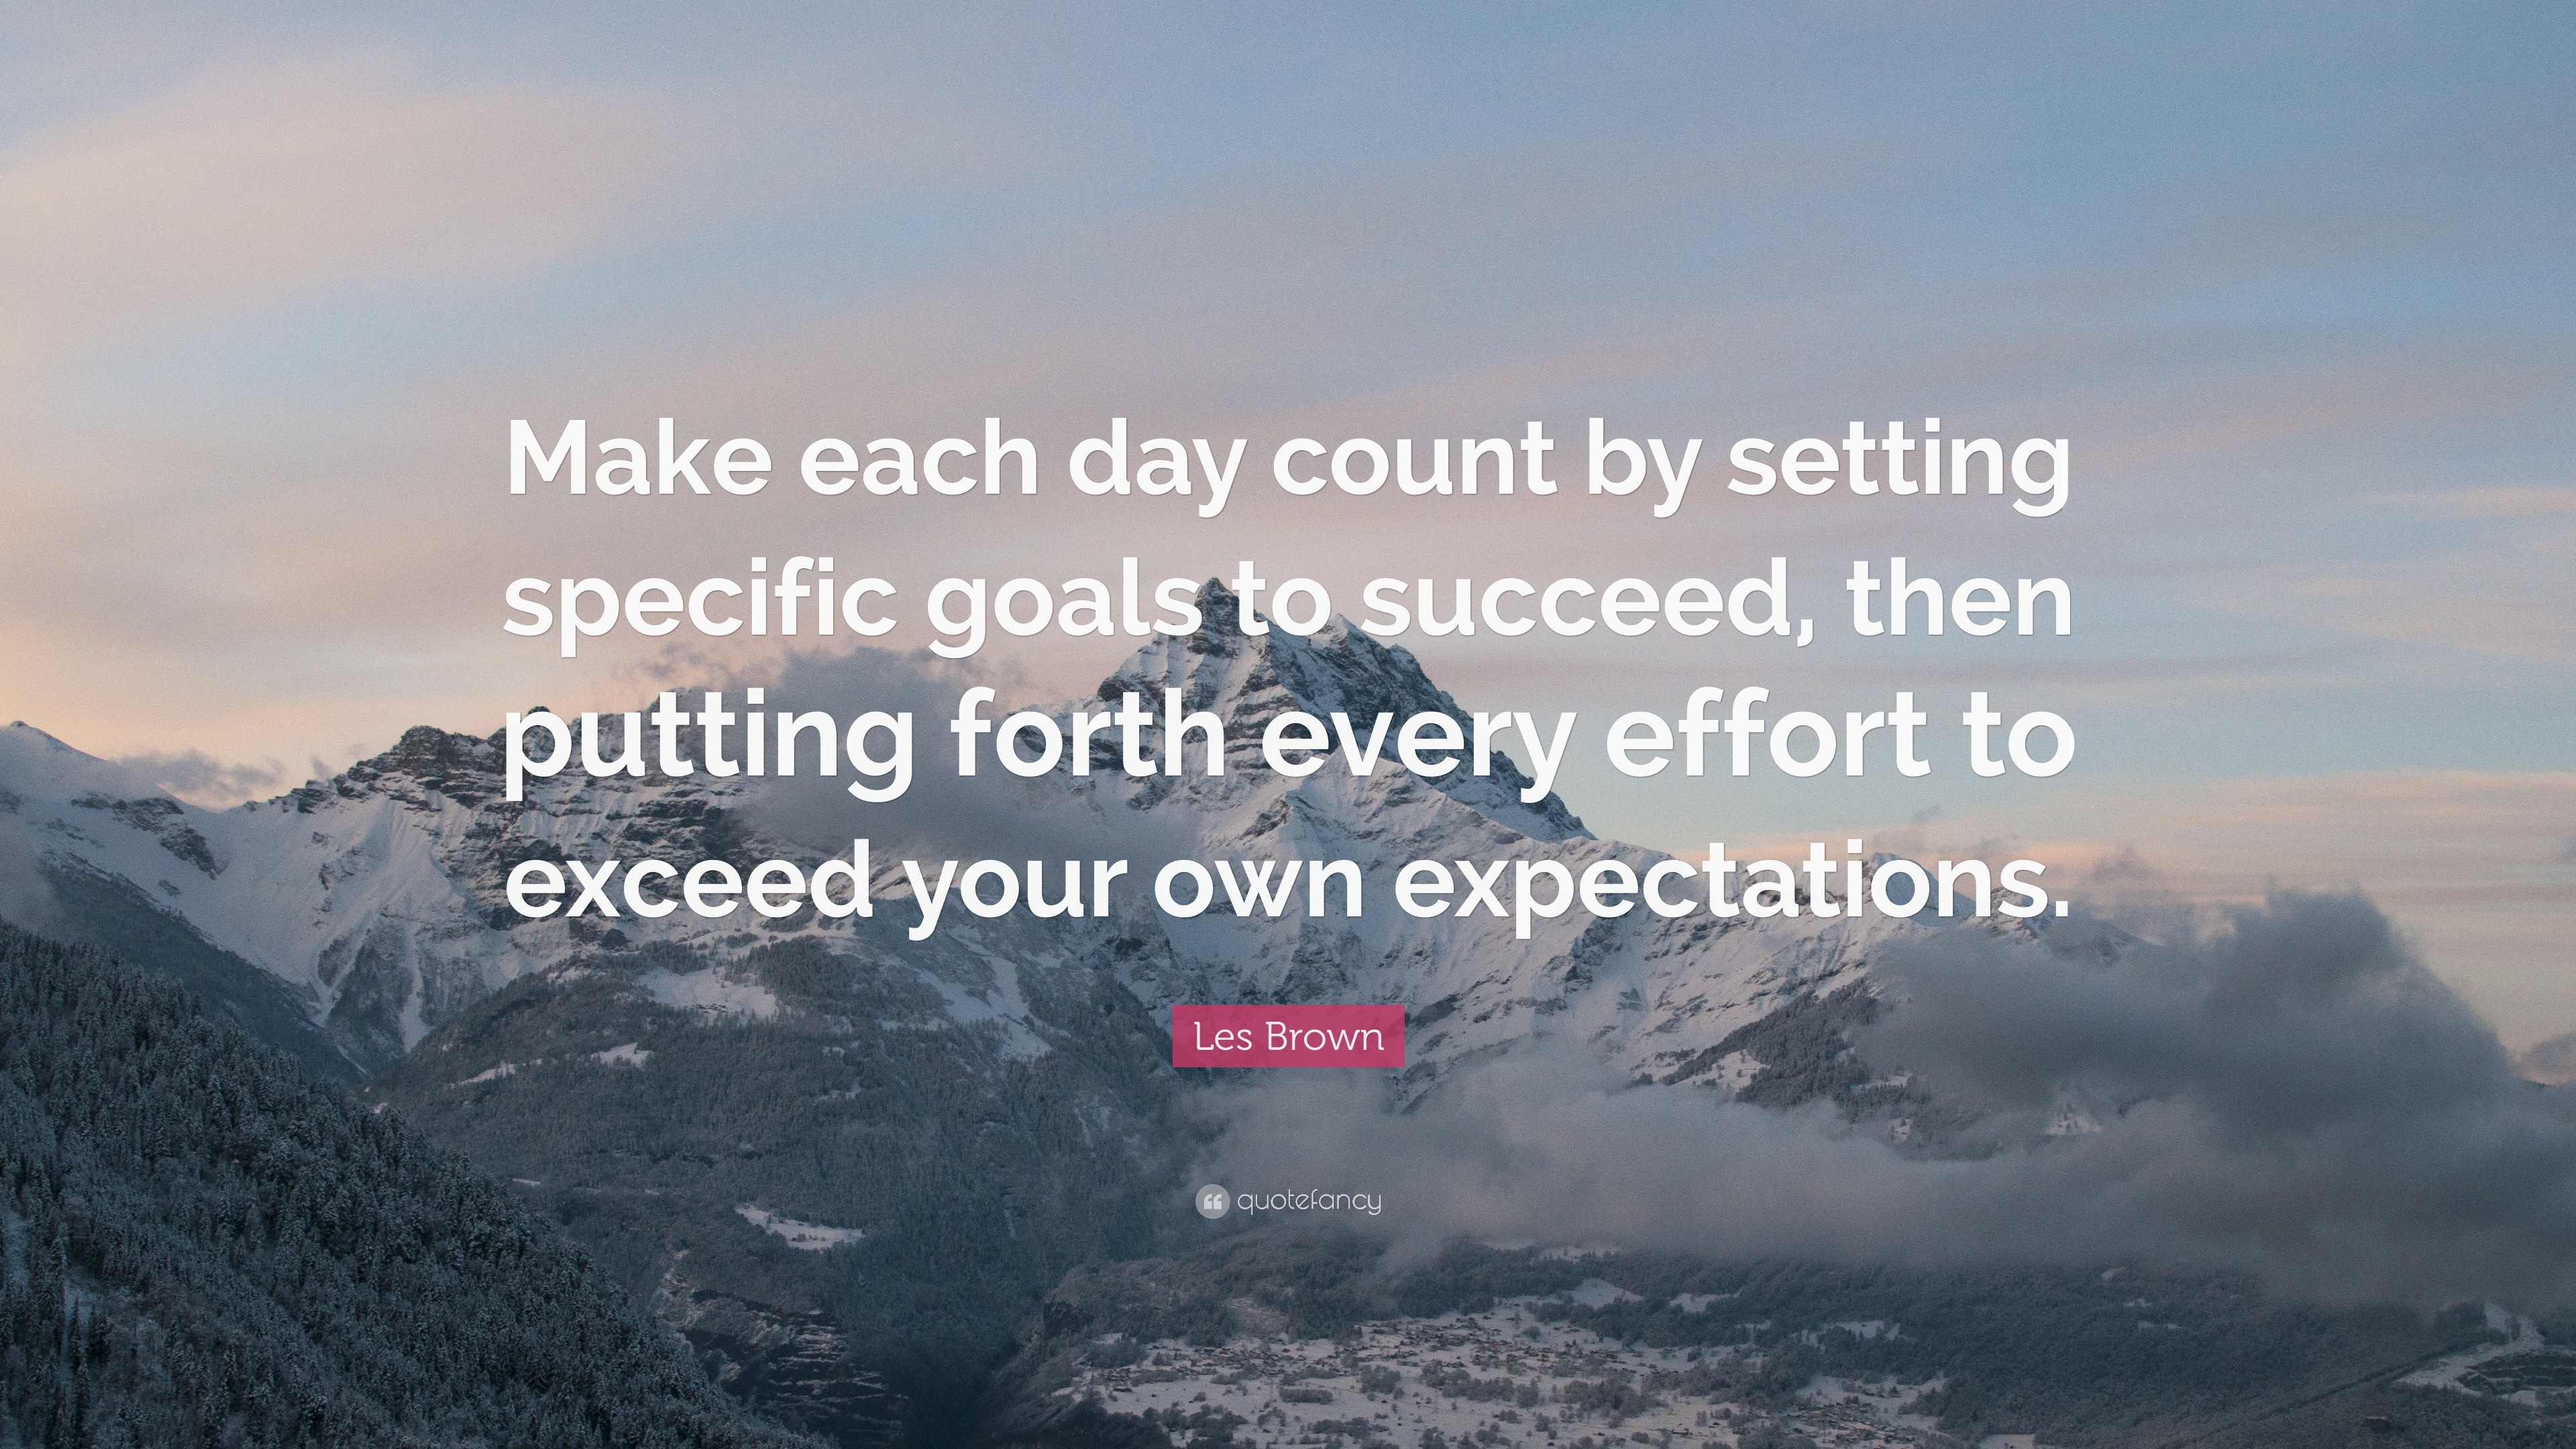 Les Brown Quote: “Make each day count by setting specific goals to